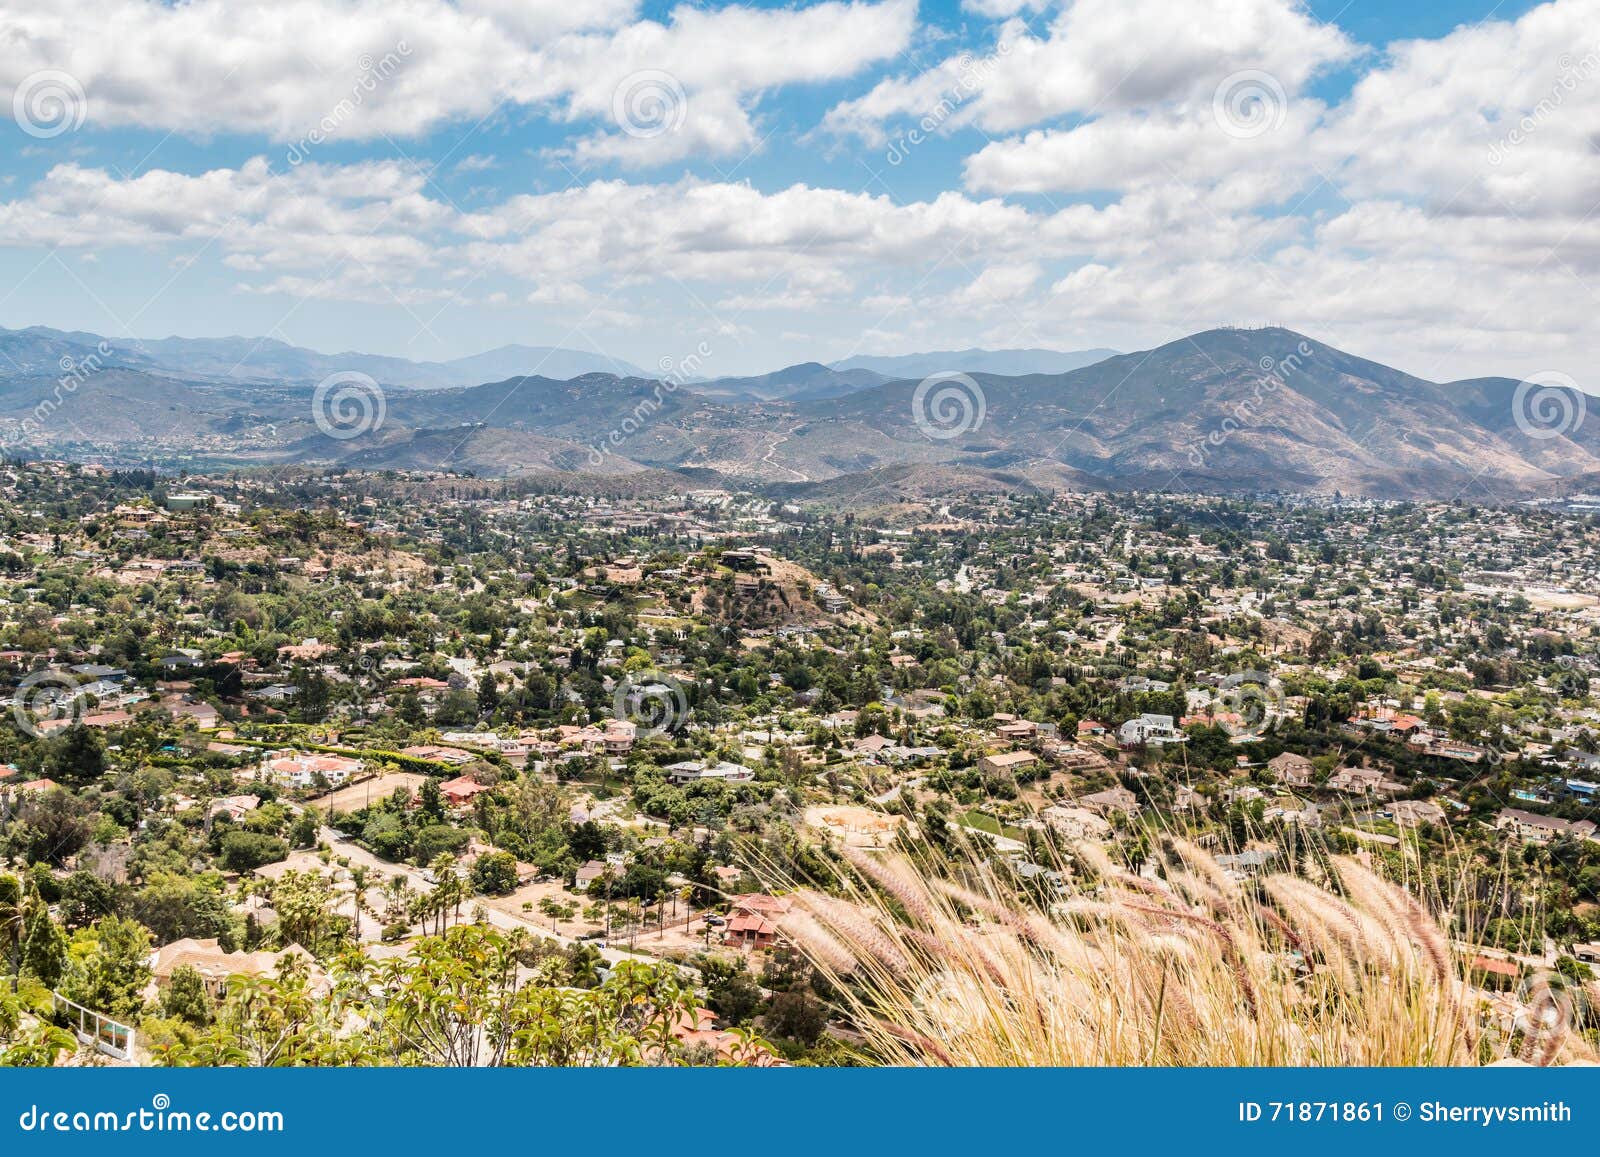 view of mountains and city from mt. helix park